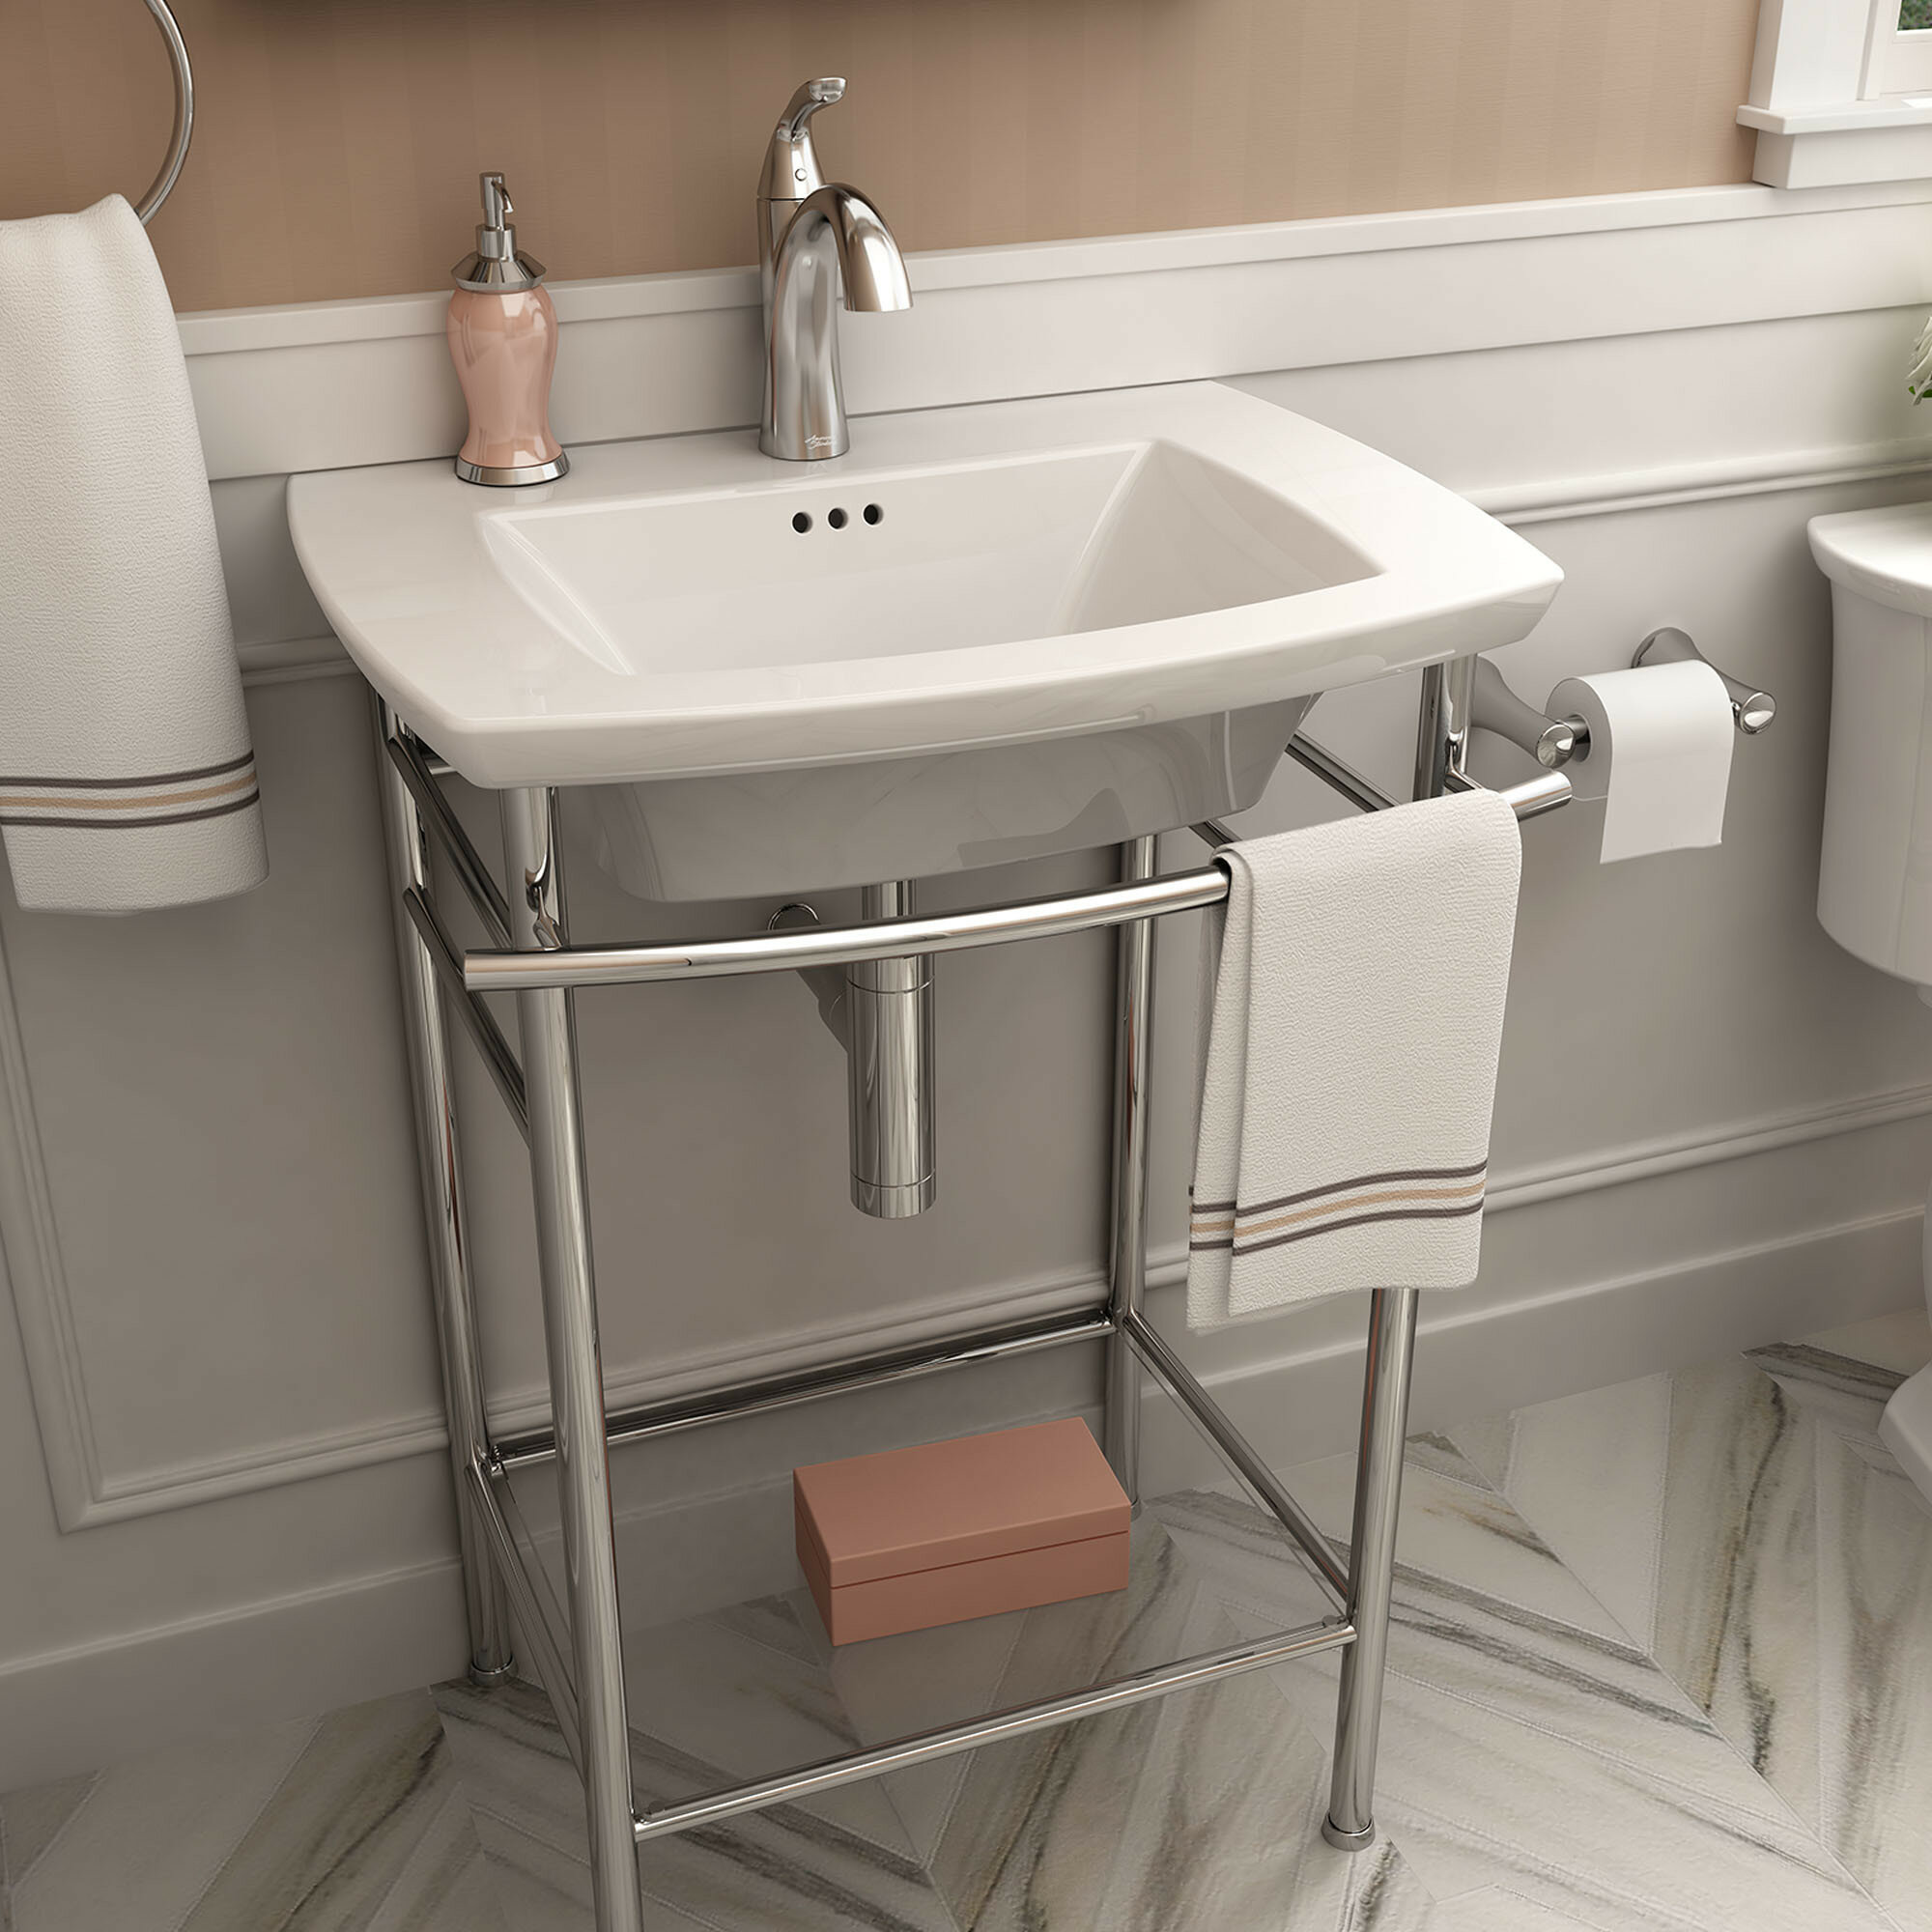 Edgemere 25 Console Bathroom Sink With Overflow